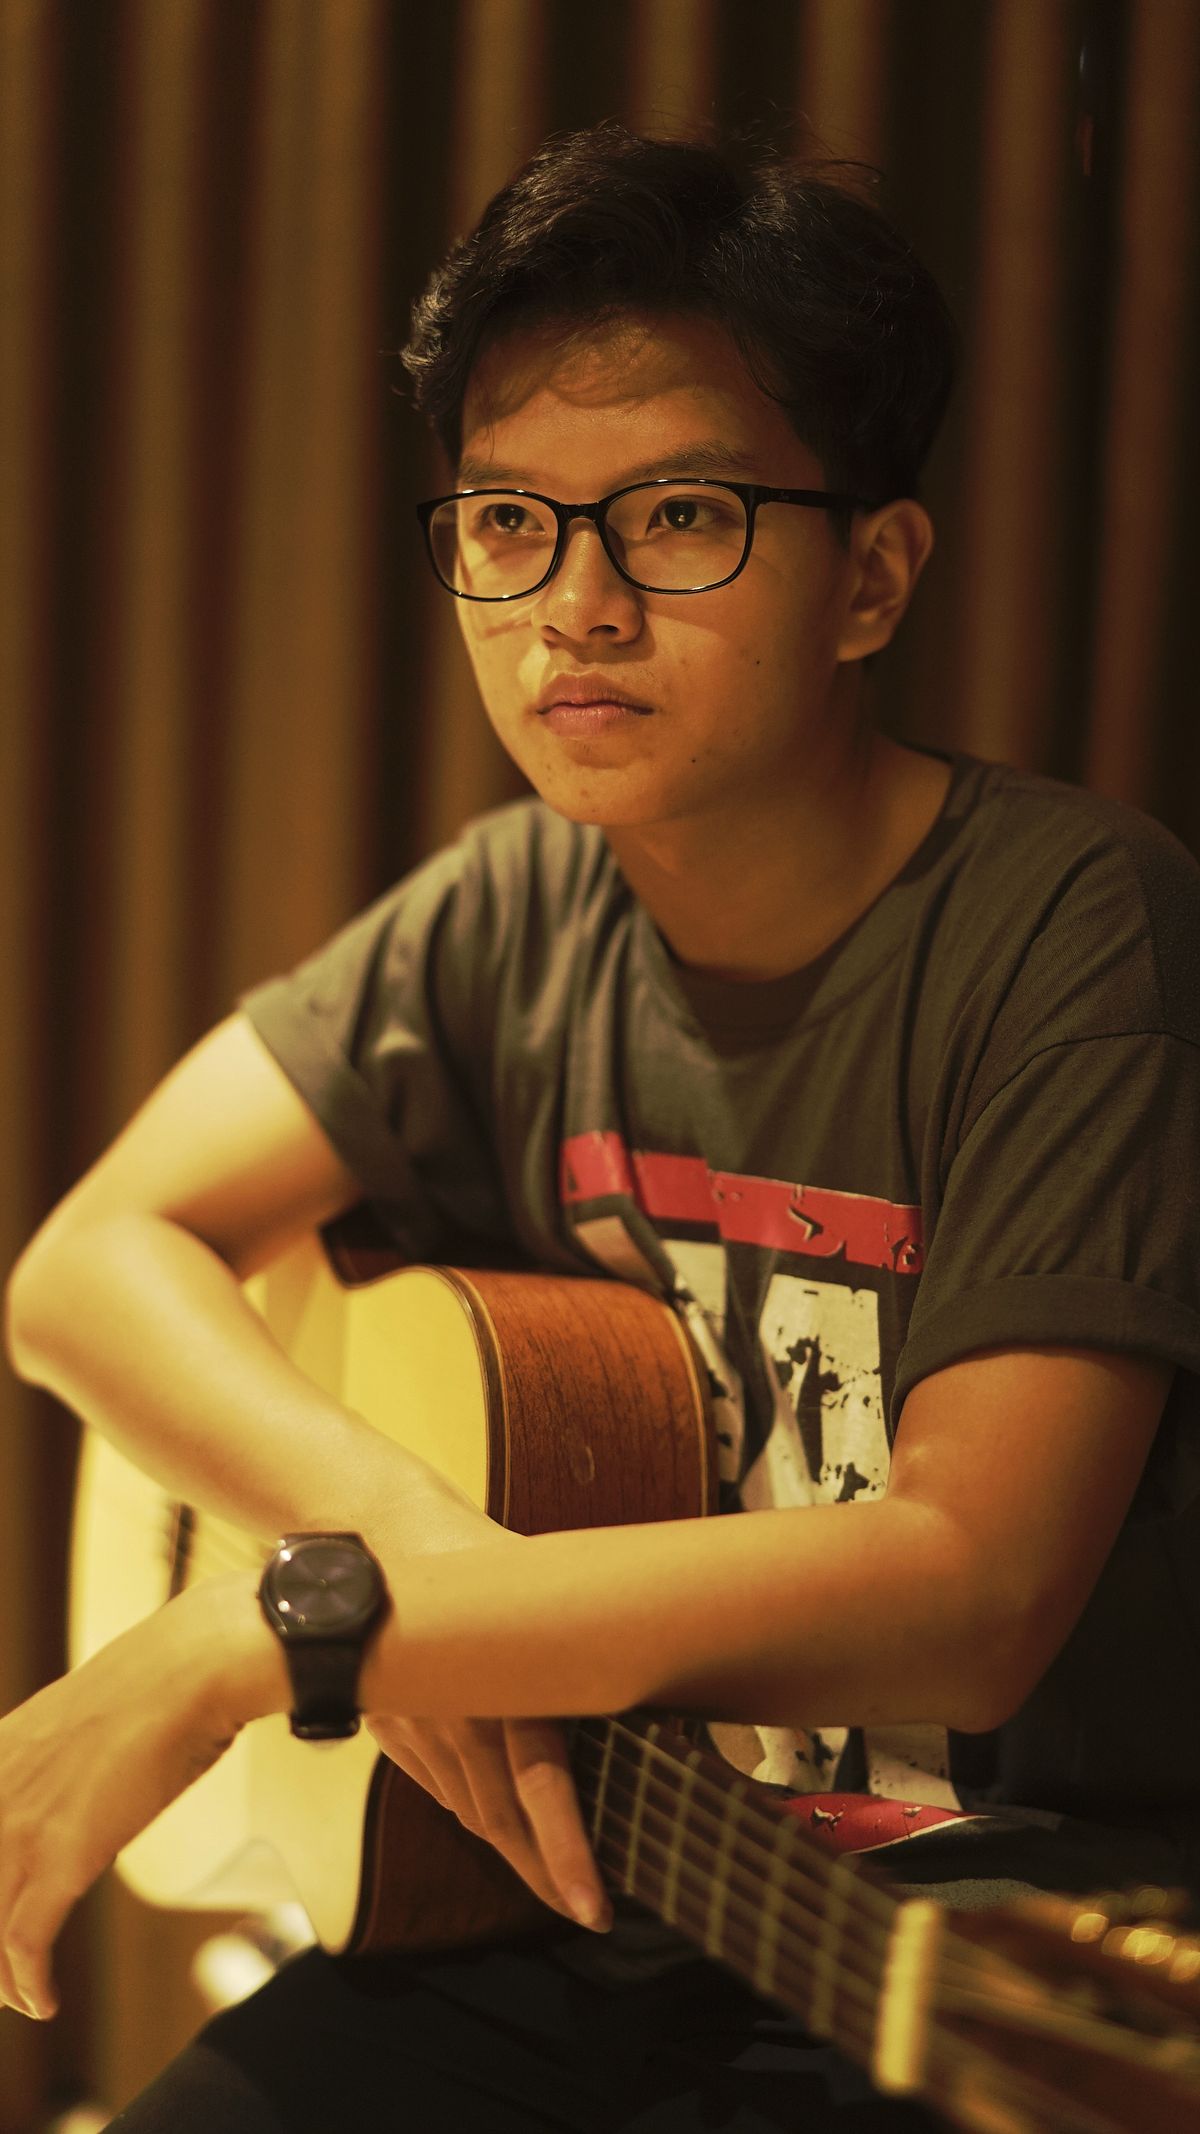 Hiimhii Used to Struggle at Karaoke, so He Decides to Write His Own Songs - Saigoneer